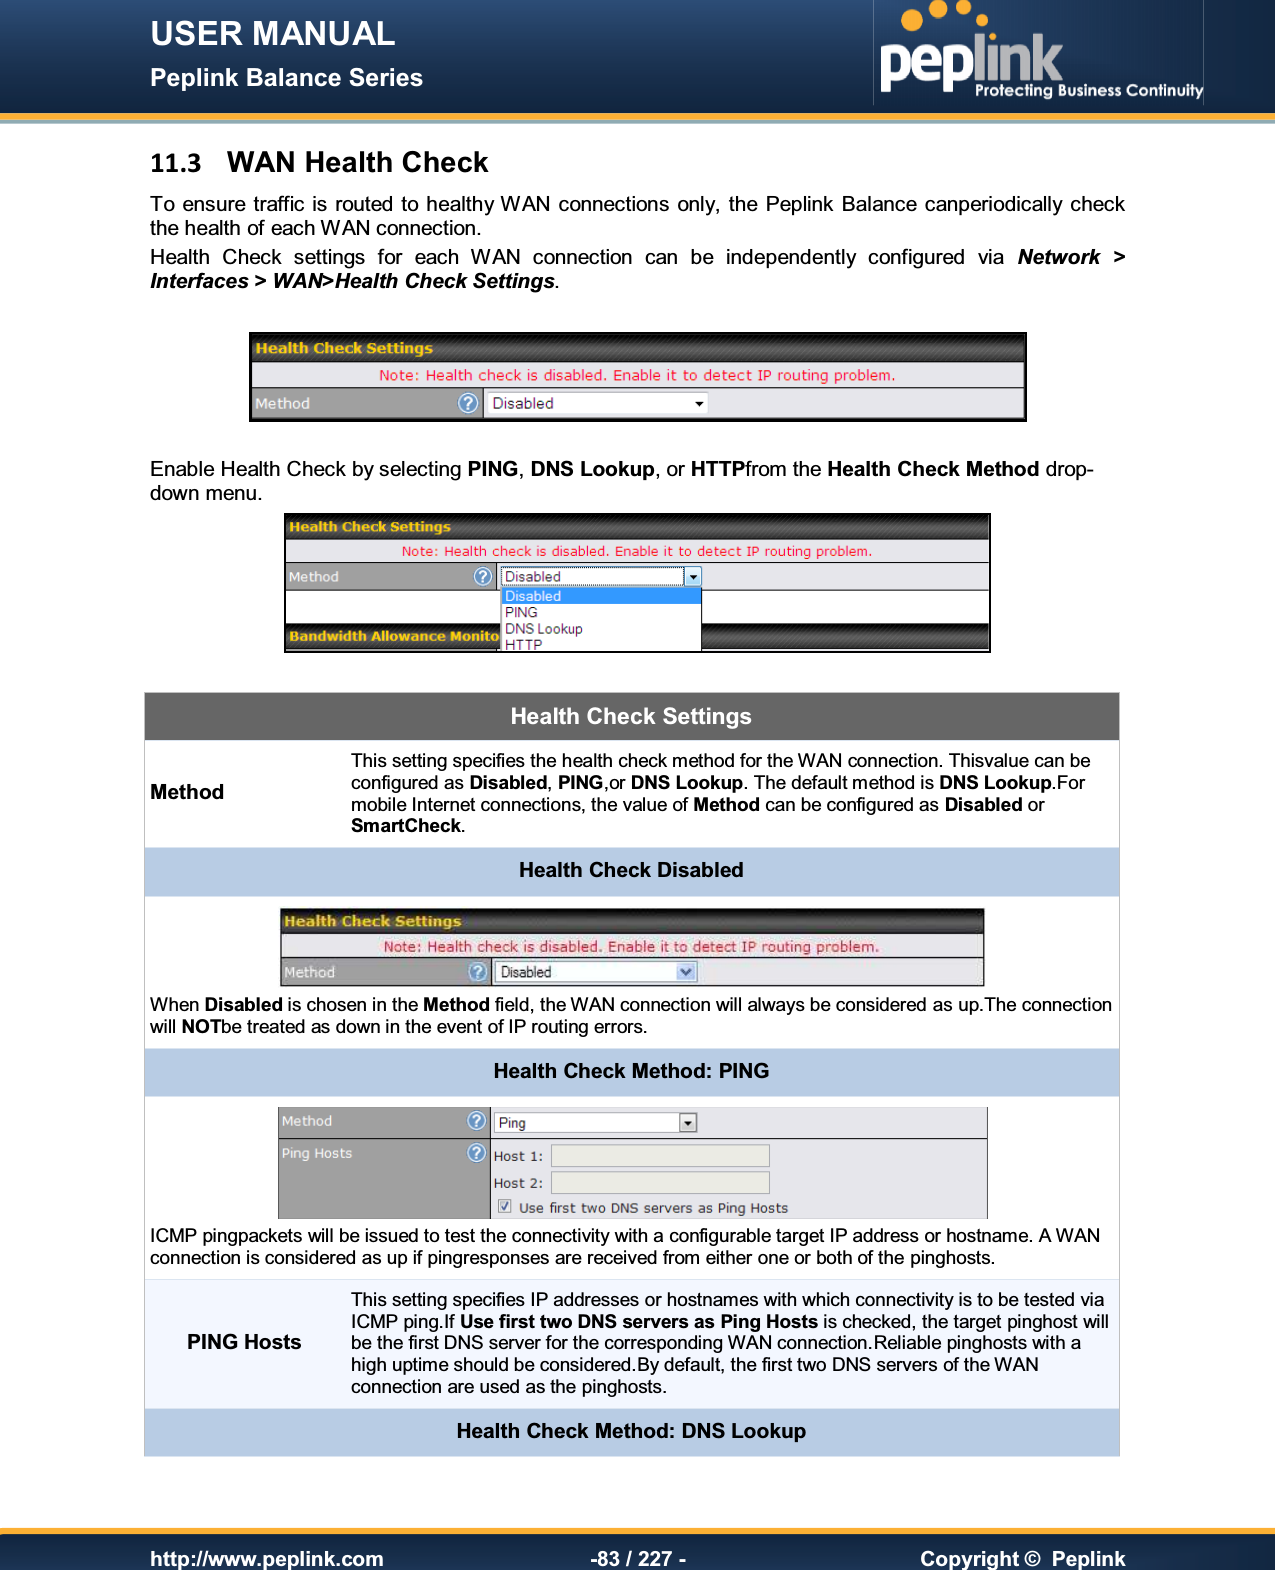 USER MANUAL Peplink Balance Series   http://www.peplink.com -83 / 227 -  Copyright ©  Peplink 11.3  WAN Health Check To  ensure traffic is routed  to healthy WAN connections only, the Peplink Balance canperiodically check the health of each WAN connection. Health  Check  settings  for  each  WAN  connection  can  be  independently  configured  via  Network  &gt; Interfaces &gt; WAN&gt;Health Check Settings.    Enable Health Check by selecting PING, DNS Lookup, or HTTPfrom the Health Check Method drop-down menu.   Health Check Settings MethodThis setting specifies the health check method for the WAN connection. Thisvalue can be configured as Disabled, PING,or DNS Lookup. The default method is DNS Lookup.For mobile Internet connections, the value of Method can be configured as Disabled or SmartCheck. Health Check Disabled  When Disabled is chosen in the Method field, the WAN connection will always be considered as up.The connection will NOTbe treated as down in the event of IP routing errors. Health Check Method: PING  ICMP pingpackets will be issued to test the connectivity with a configurable target IP address or hostname. A WAN connection is considered as up if pingresponses are received from either one or both of the pinghosts. PING Hosts This setting specifies IP addresses or hostnames with which connectivity is to be tested via ICMP ping.If Use first two DNS servers as Ping Hosts is checked, the target pinghost will be the first DNS server for the corresponding WAN connection.Reliable pinghosts with a high uptime should be considered.By default, the first two DNS servers of the WAN connection are used as the pinghosts. Health Check Method: DNS Lookup 